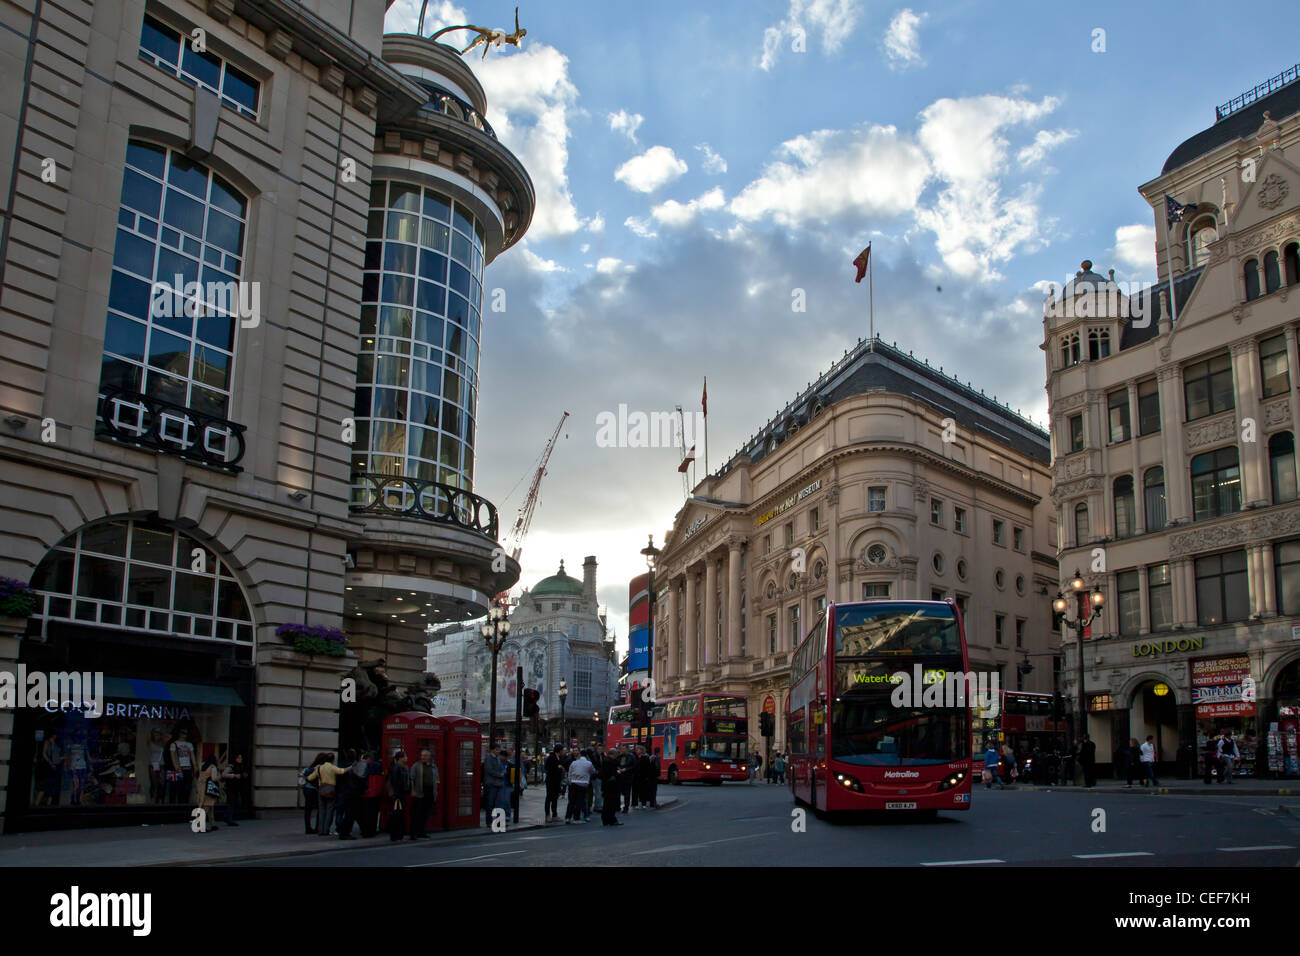 London Piccadilly with London buses and Telephone boxes, busy junction with bus bound for Waterloo. Stock Photo